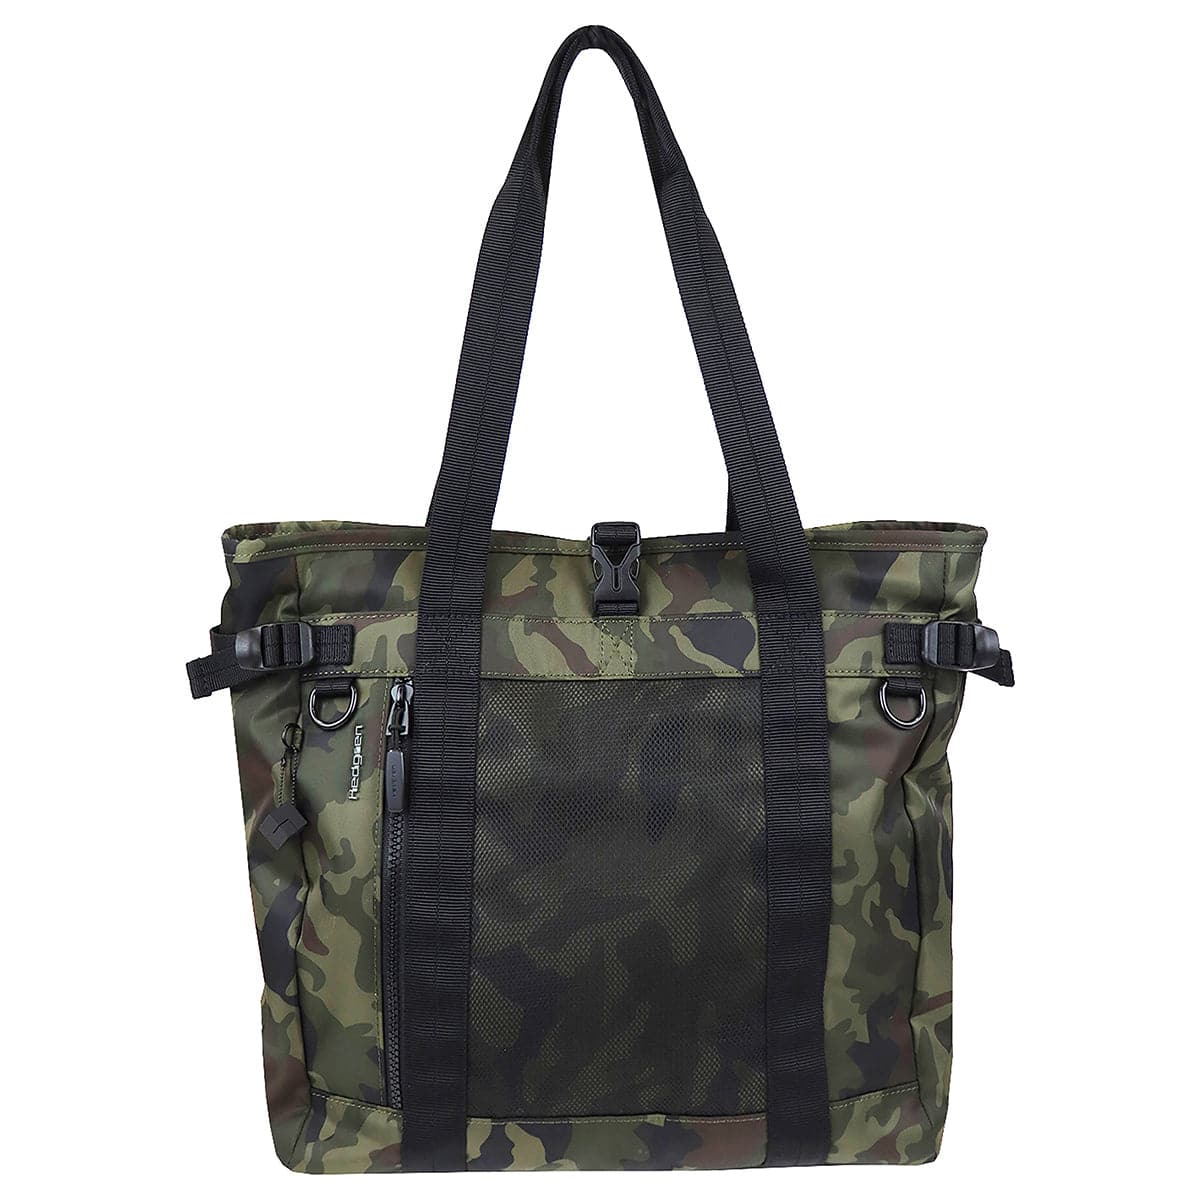 Hedgren Summit Sustainably Made Tote Bag